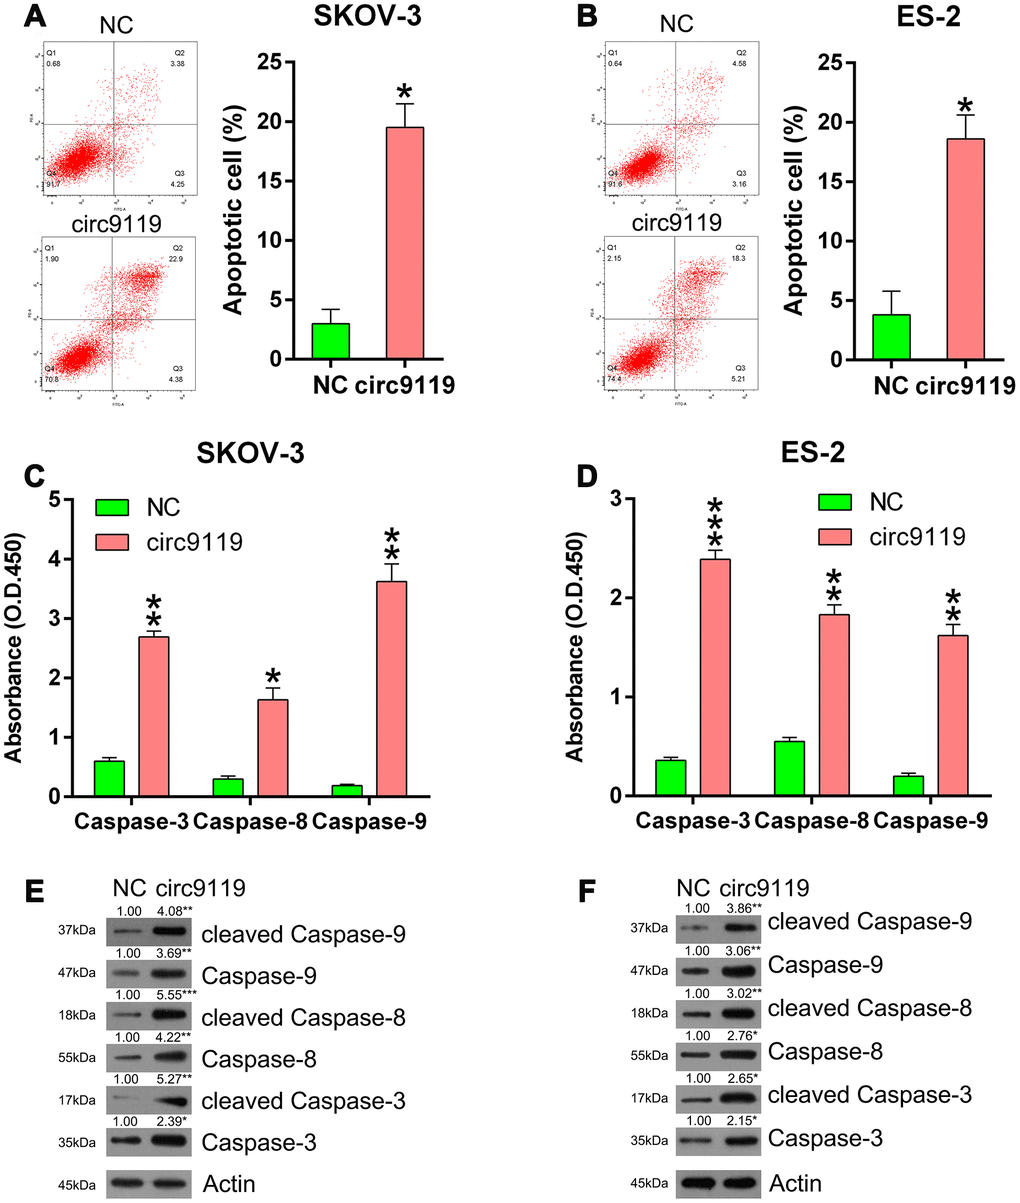 circ9119 induced apoptosis in ES-2 and SKOV-3 cells. Cells were subjected to transfection with circ9119 overexpression or NC vector for 1.5 d. (A, B) Flow cytometry results displayed the number of apoptotic cells. (C, D) Caspases activity detection kit was used to detect the activity of caspase 3, caspase 8, and caspase 9 post transfection. (E, F) Western blotting was conducted to examine the expression of caspase 3, caspase 8, and caspase 9 and their cleavage forms. Actin represents β-actin. n = 3. *P 